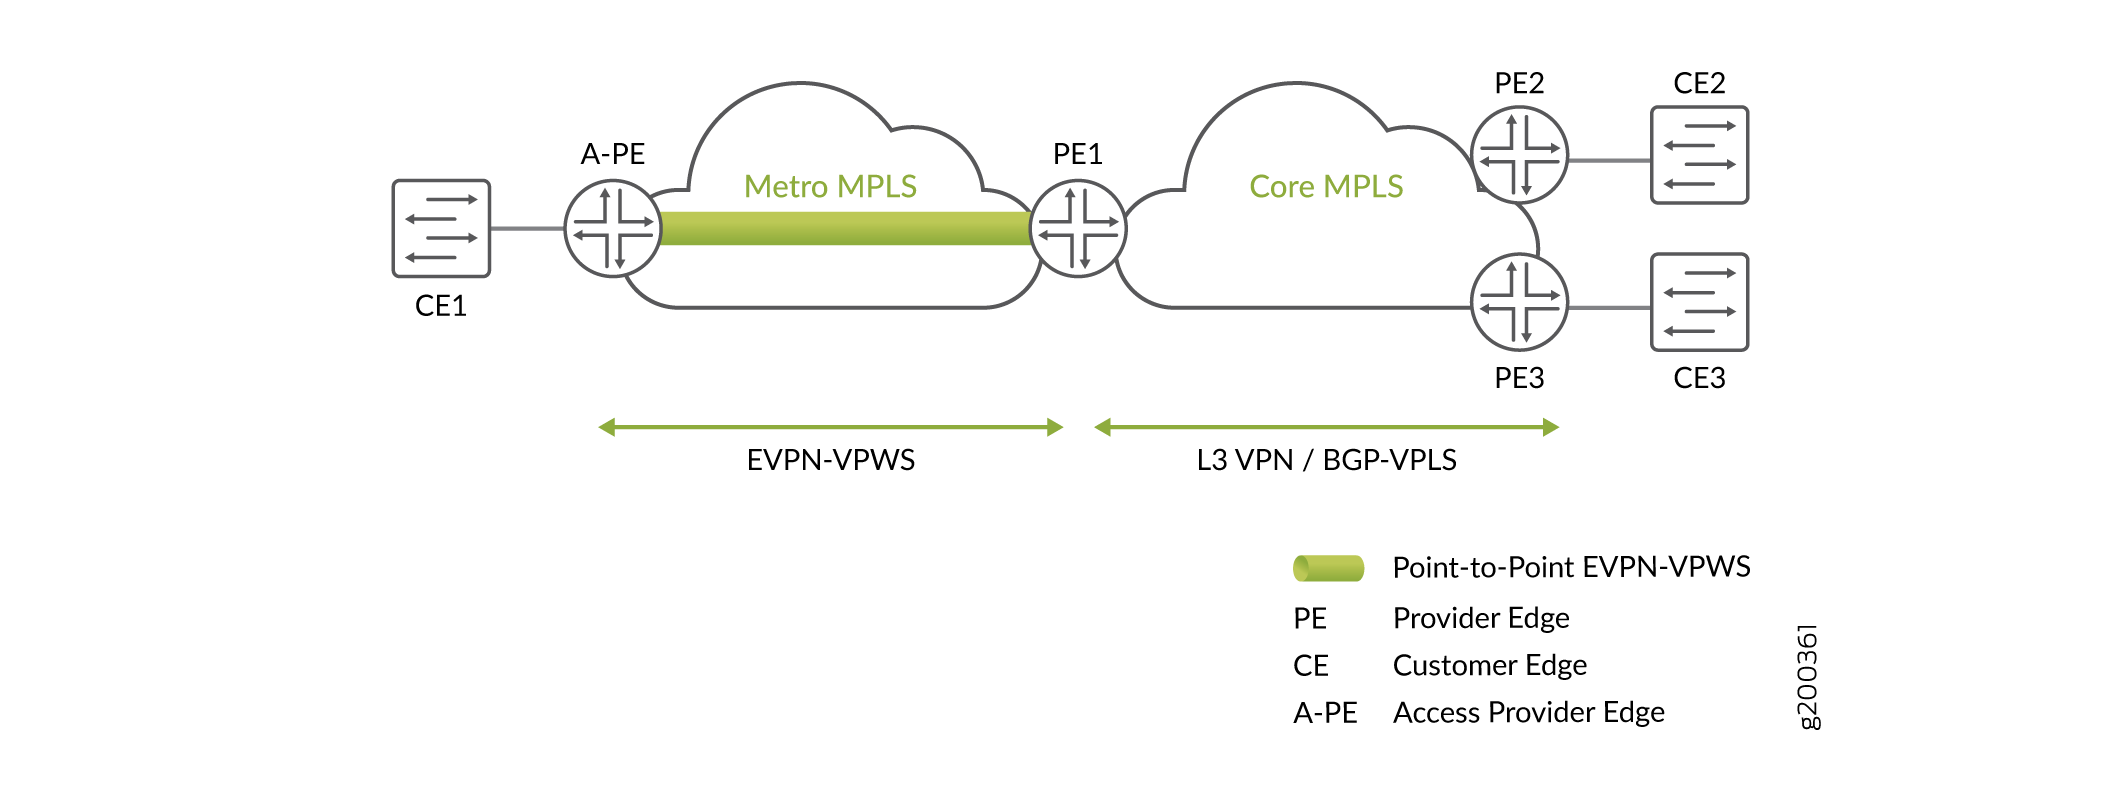 EVPN-VPWS with Pseudowire Subscriber Interface